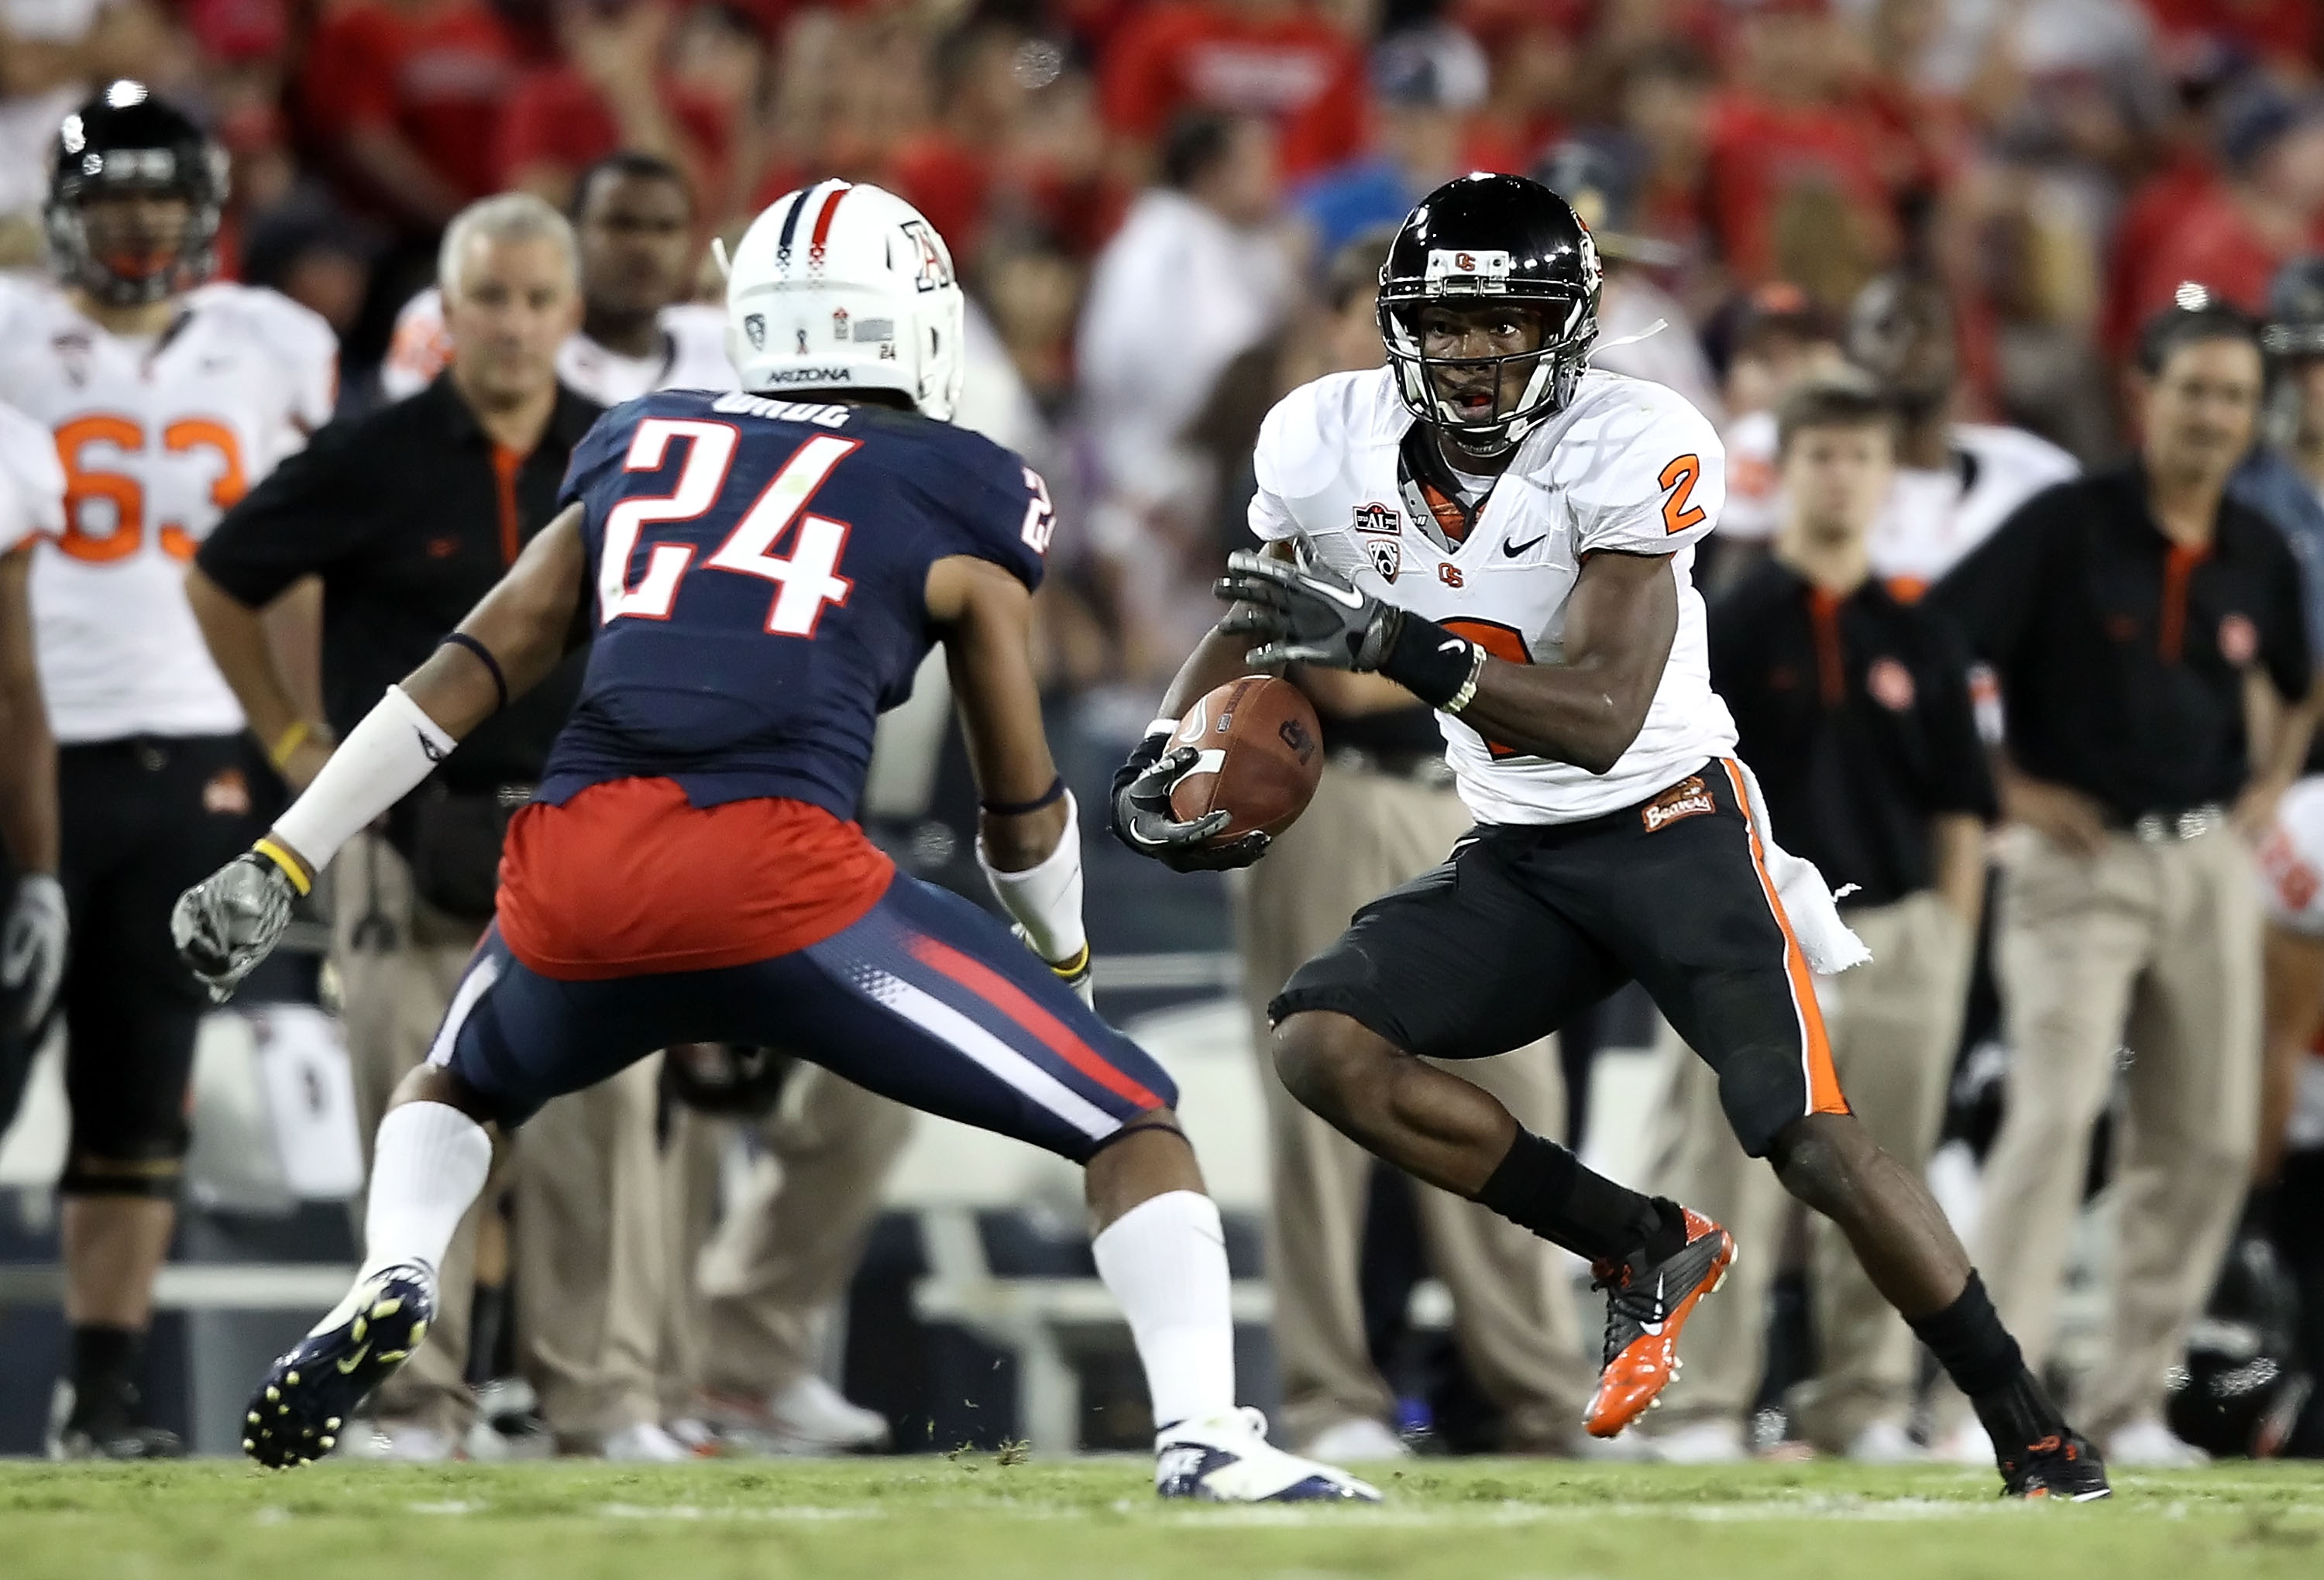 TUCSON, AZ - OCTOBER 09:  Wide receiver Markus Wheaton #2 of the Oregon State Beavers runs with the football after a 6 yard reception against the Arizona Wildcats during the college football game at Arizona Stadium on October 9, 2010 in Tucson, Arizona.